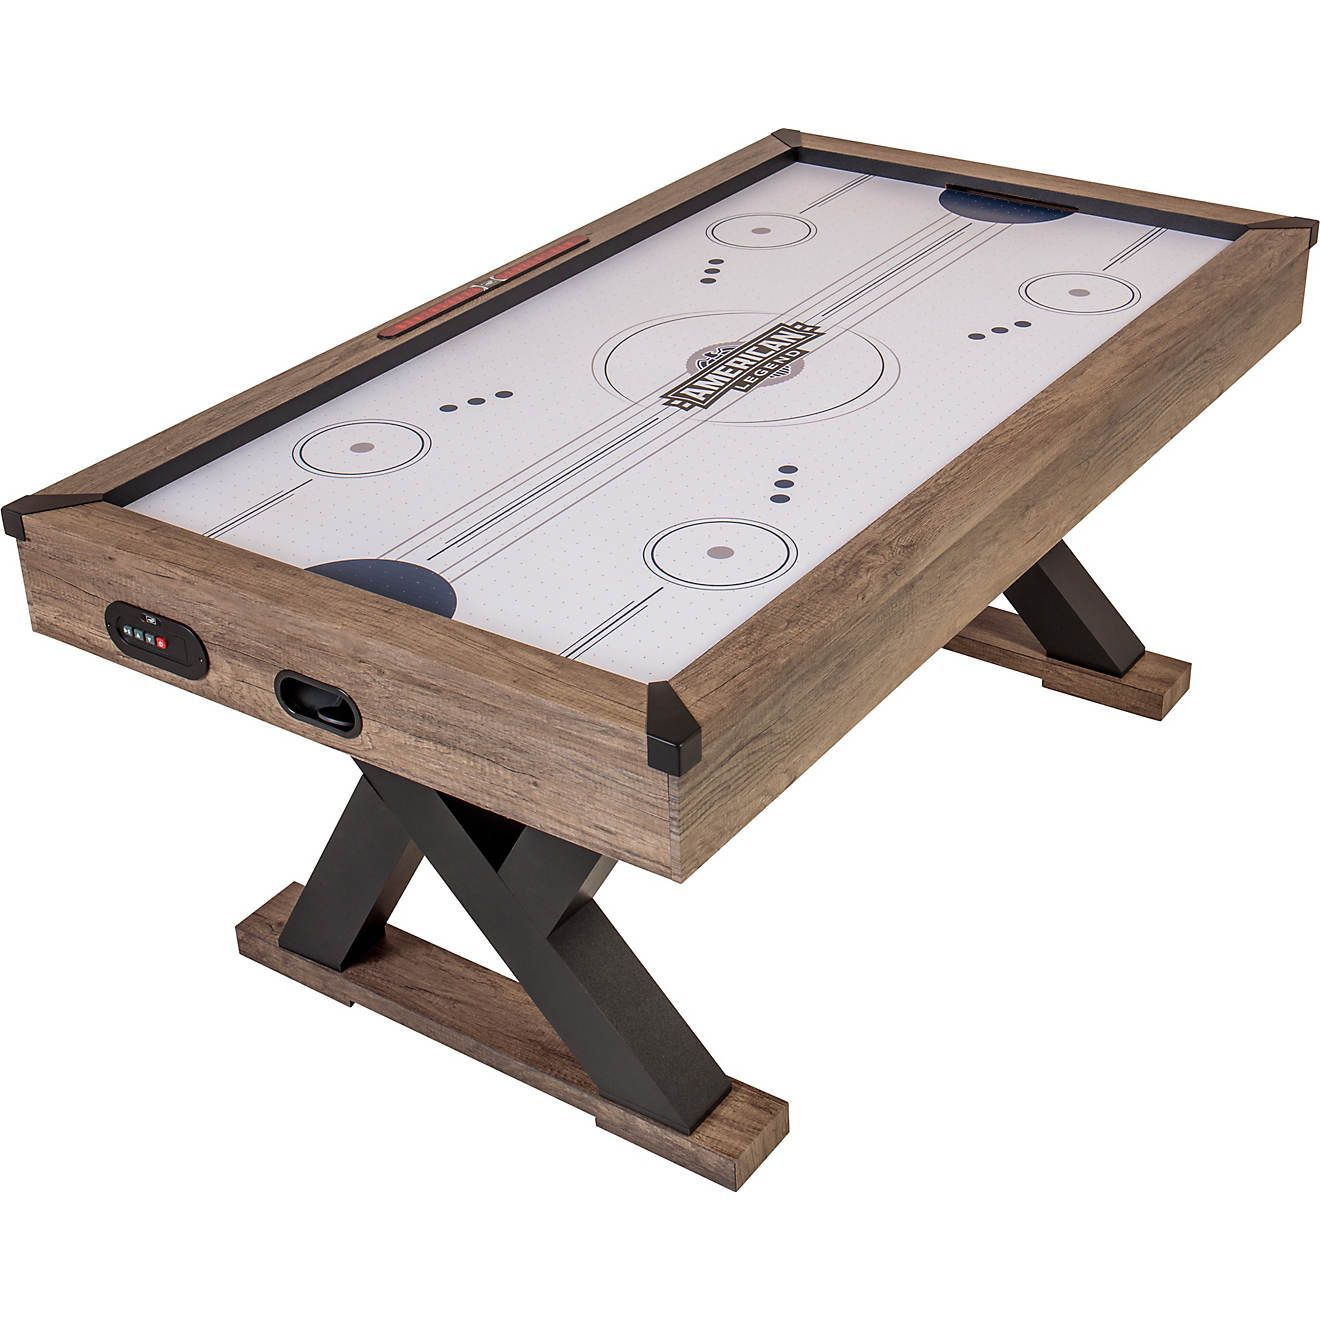 American Legend Kensington 72 in Air Hockey Table | Academy Sports + Outdoor Affiliate